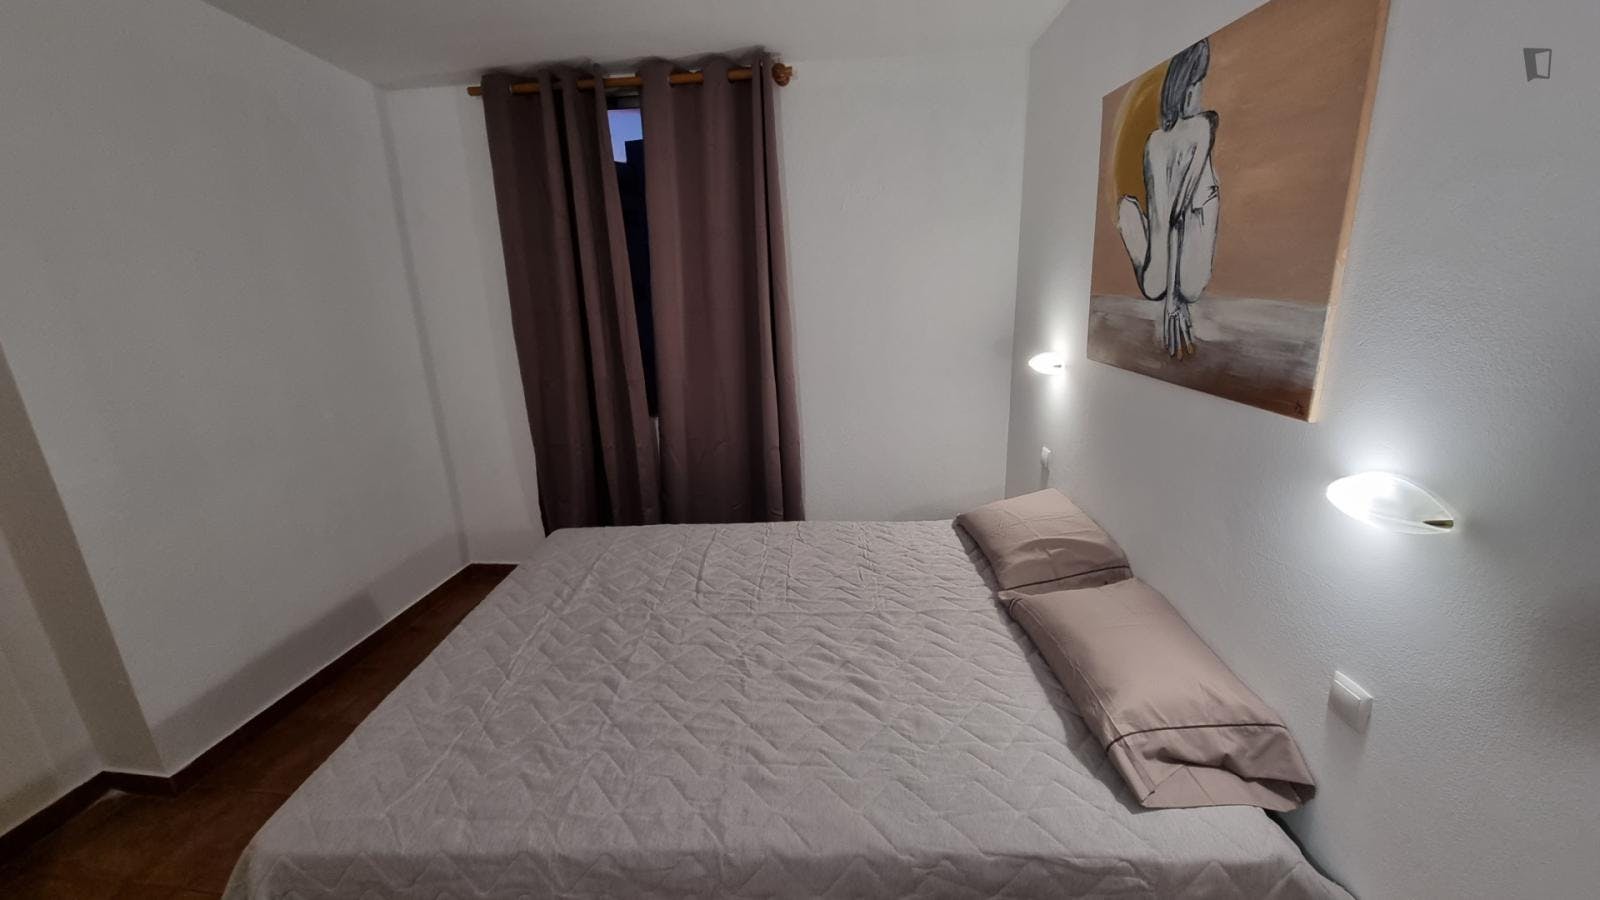 Inviting 1-bedroom apartment in Funchal city centre